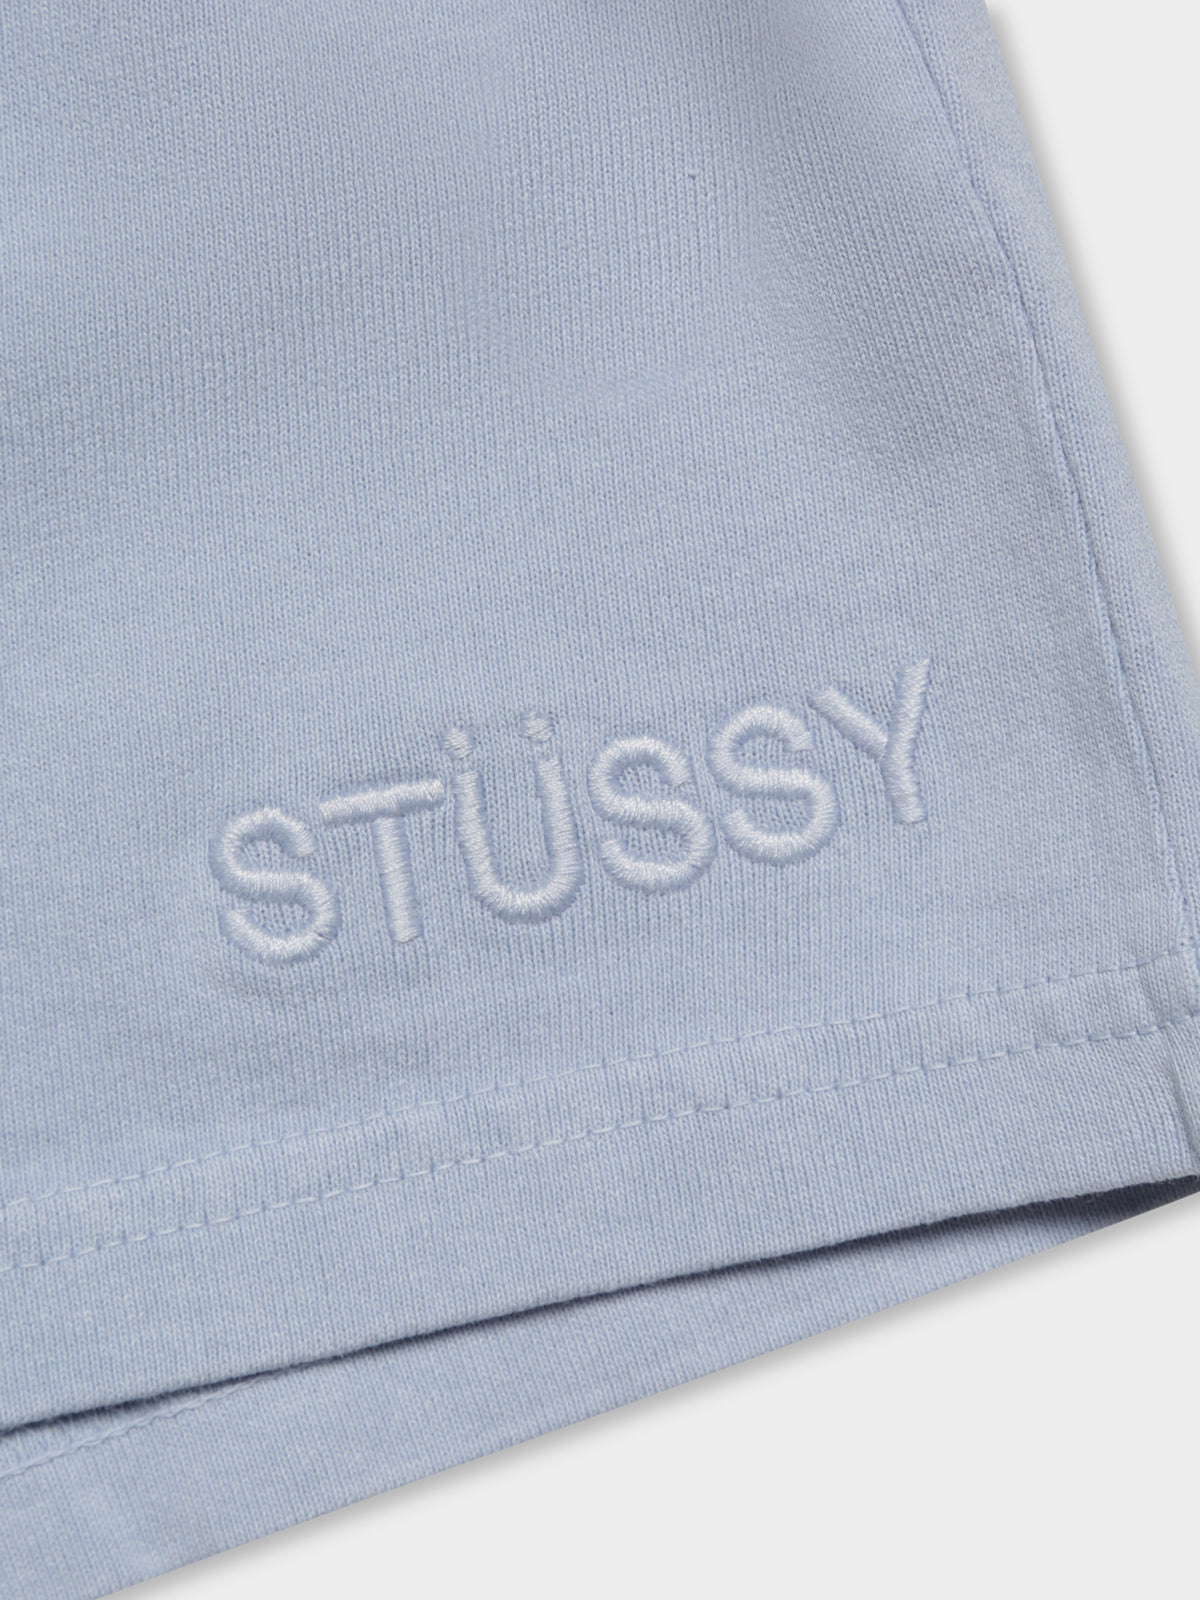 Trail Rugby Shorts in Pale Blue